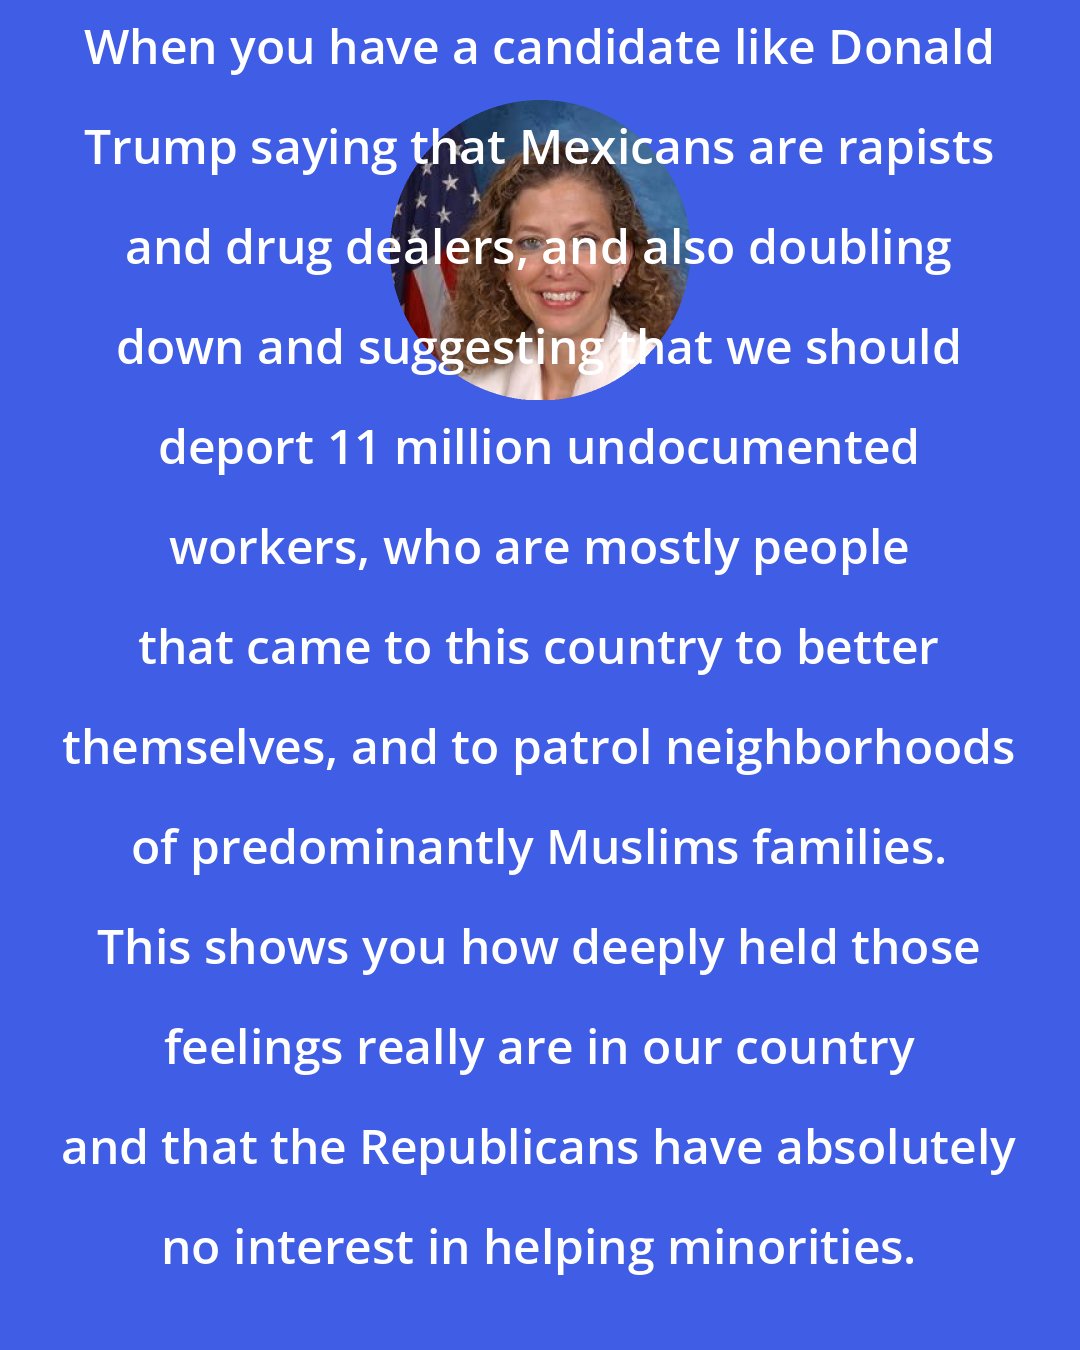 Debbie Wasserman Schultz: When you have a candidate like Donald Trump saying that Mexicans are rapists and drug dealers, and also doubling down and suggesting that we should deport 11 million undocumented workers, who are mostly people that came to this country to better themselves, and to patrol neighborhoods of predominantly Muslims families. This shows you how deeply held those feelings really are in our country and that the Republicans have absolutely no interest in helping minorities.